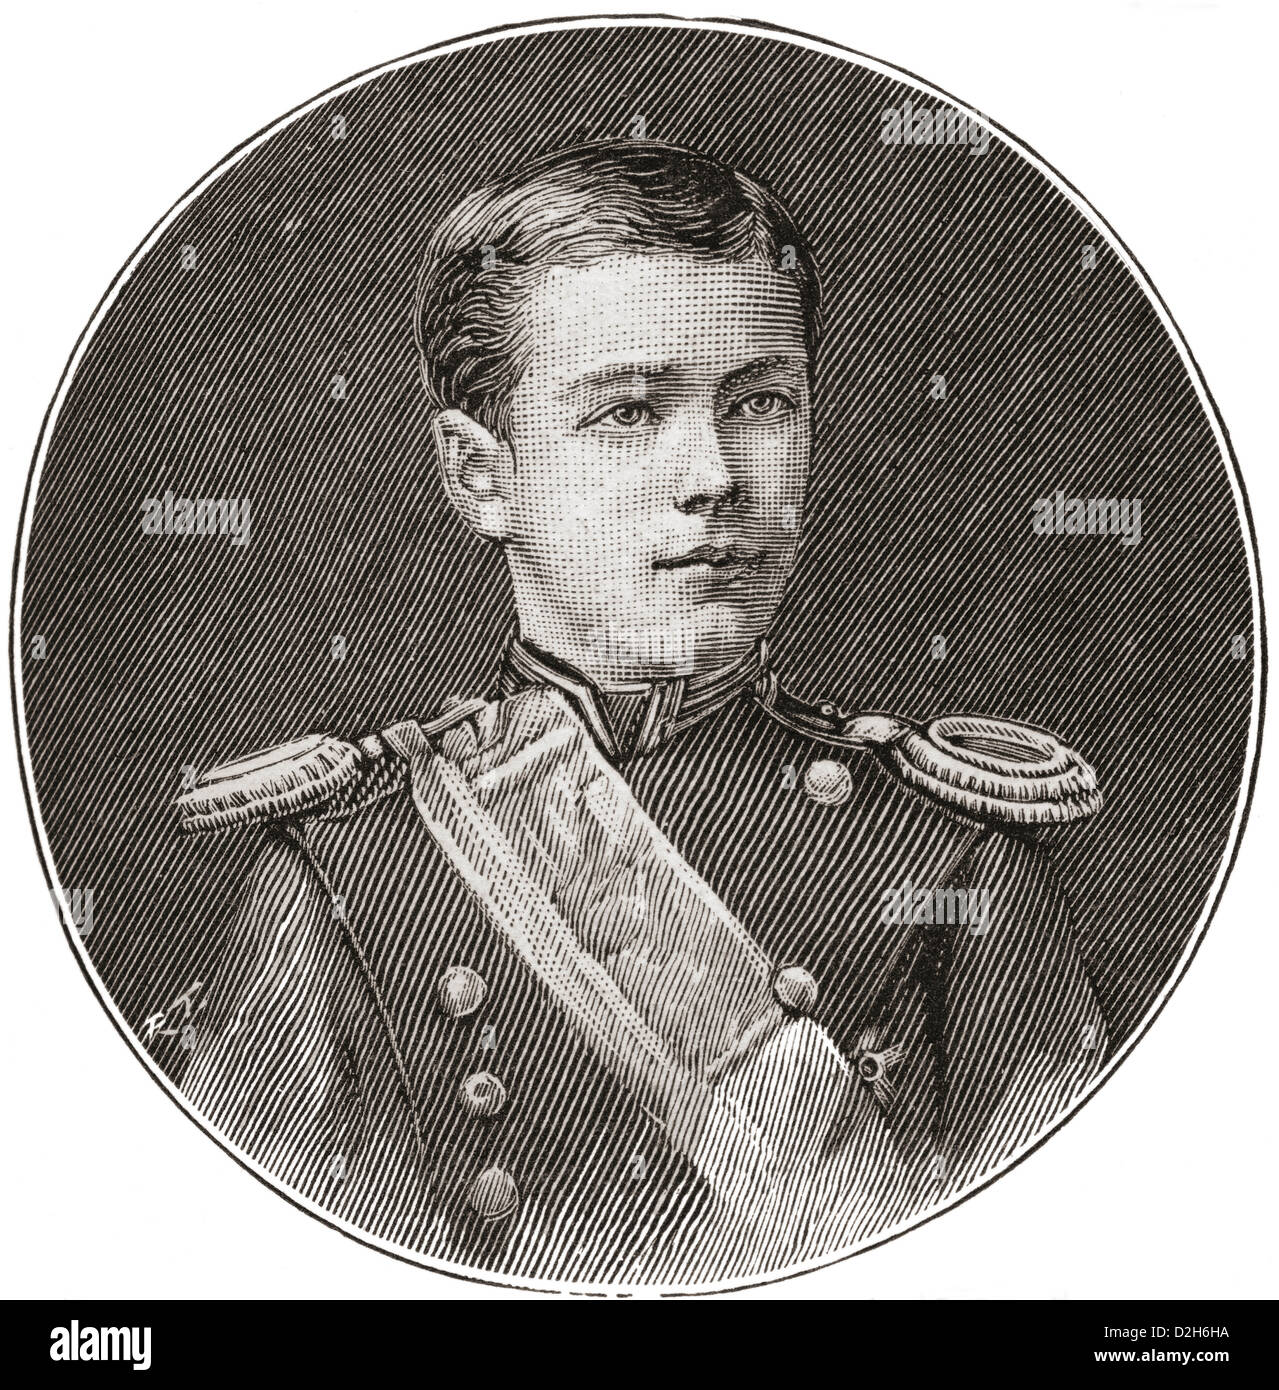 Nicholas II, 1868 – 1918. Seen here aged 14. Last Emperor of Russia, Grand Duke of Finland, and titular King of Poland. Stock Photo